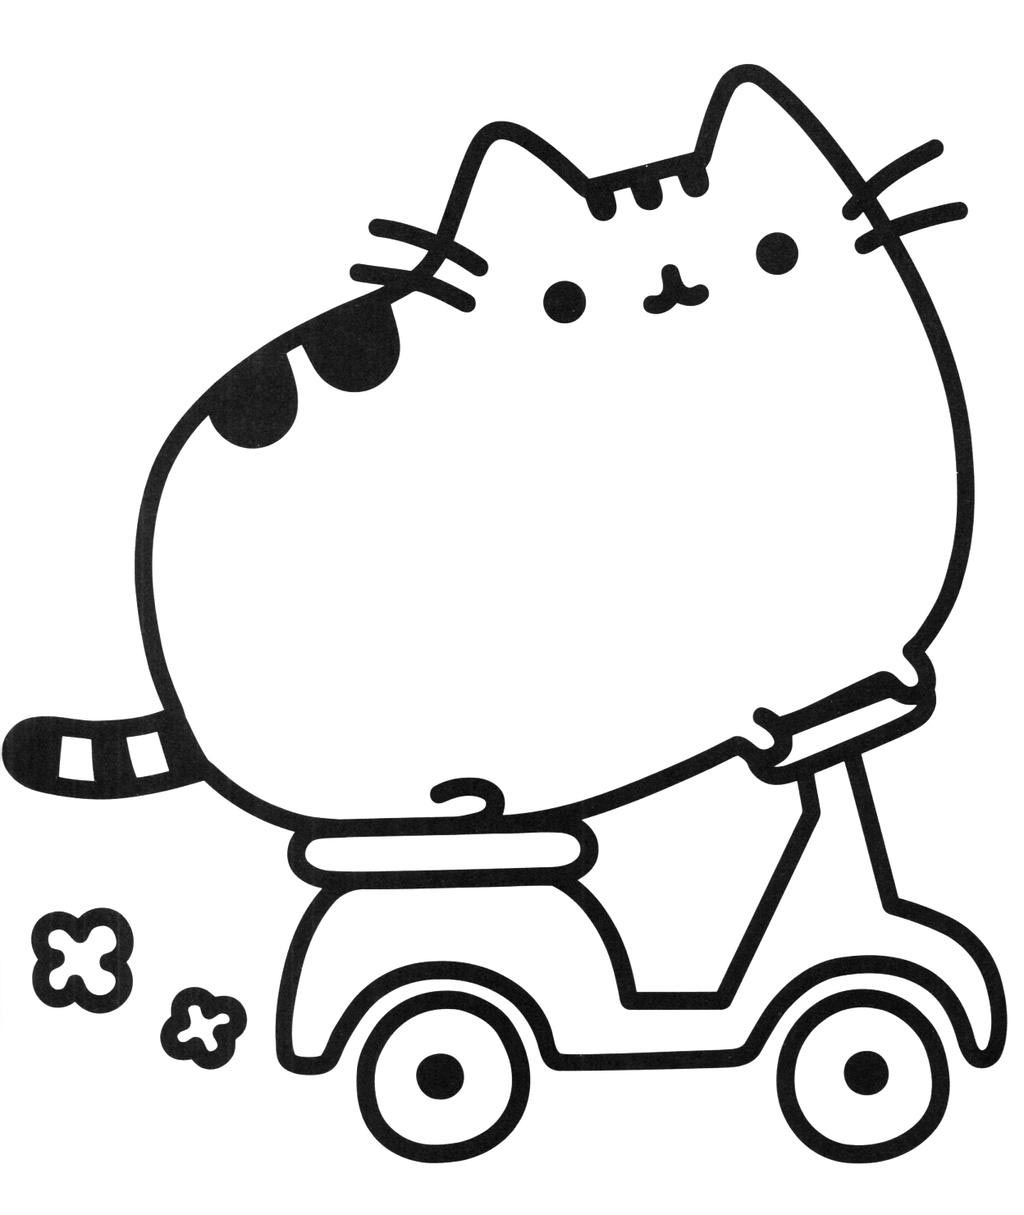 Coloring Pages : Coloring Pages Printable Pusheen Cat Black ...